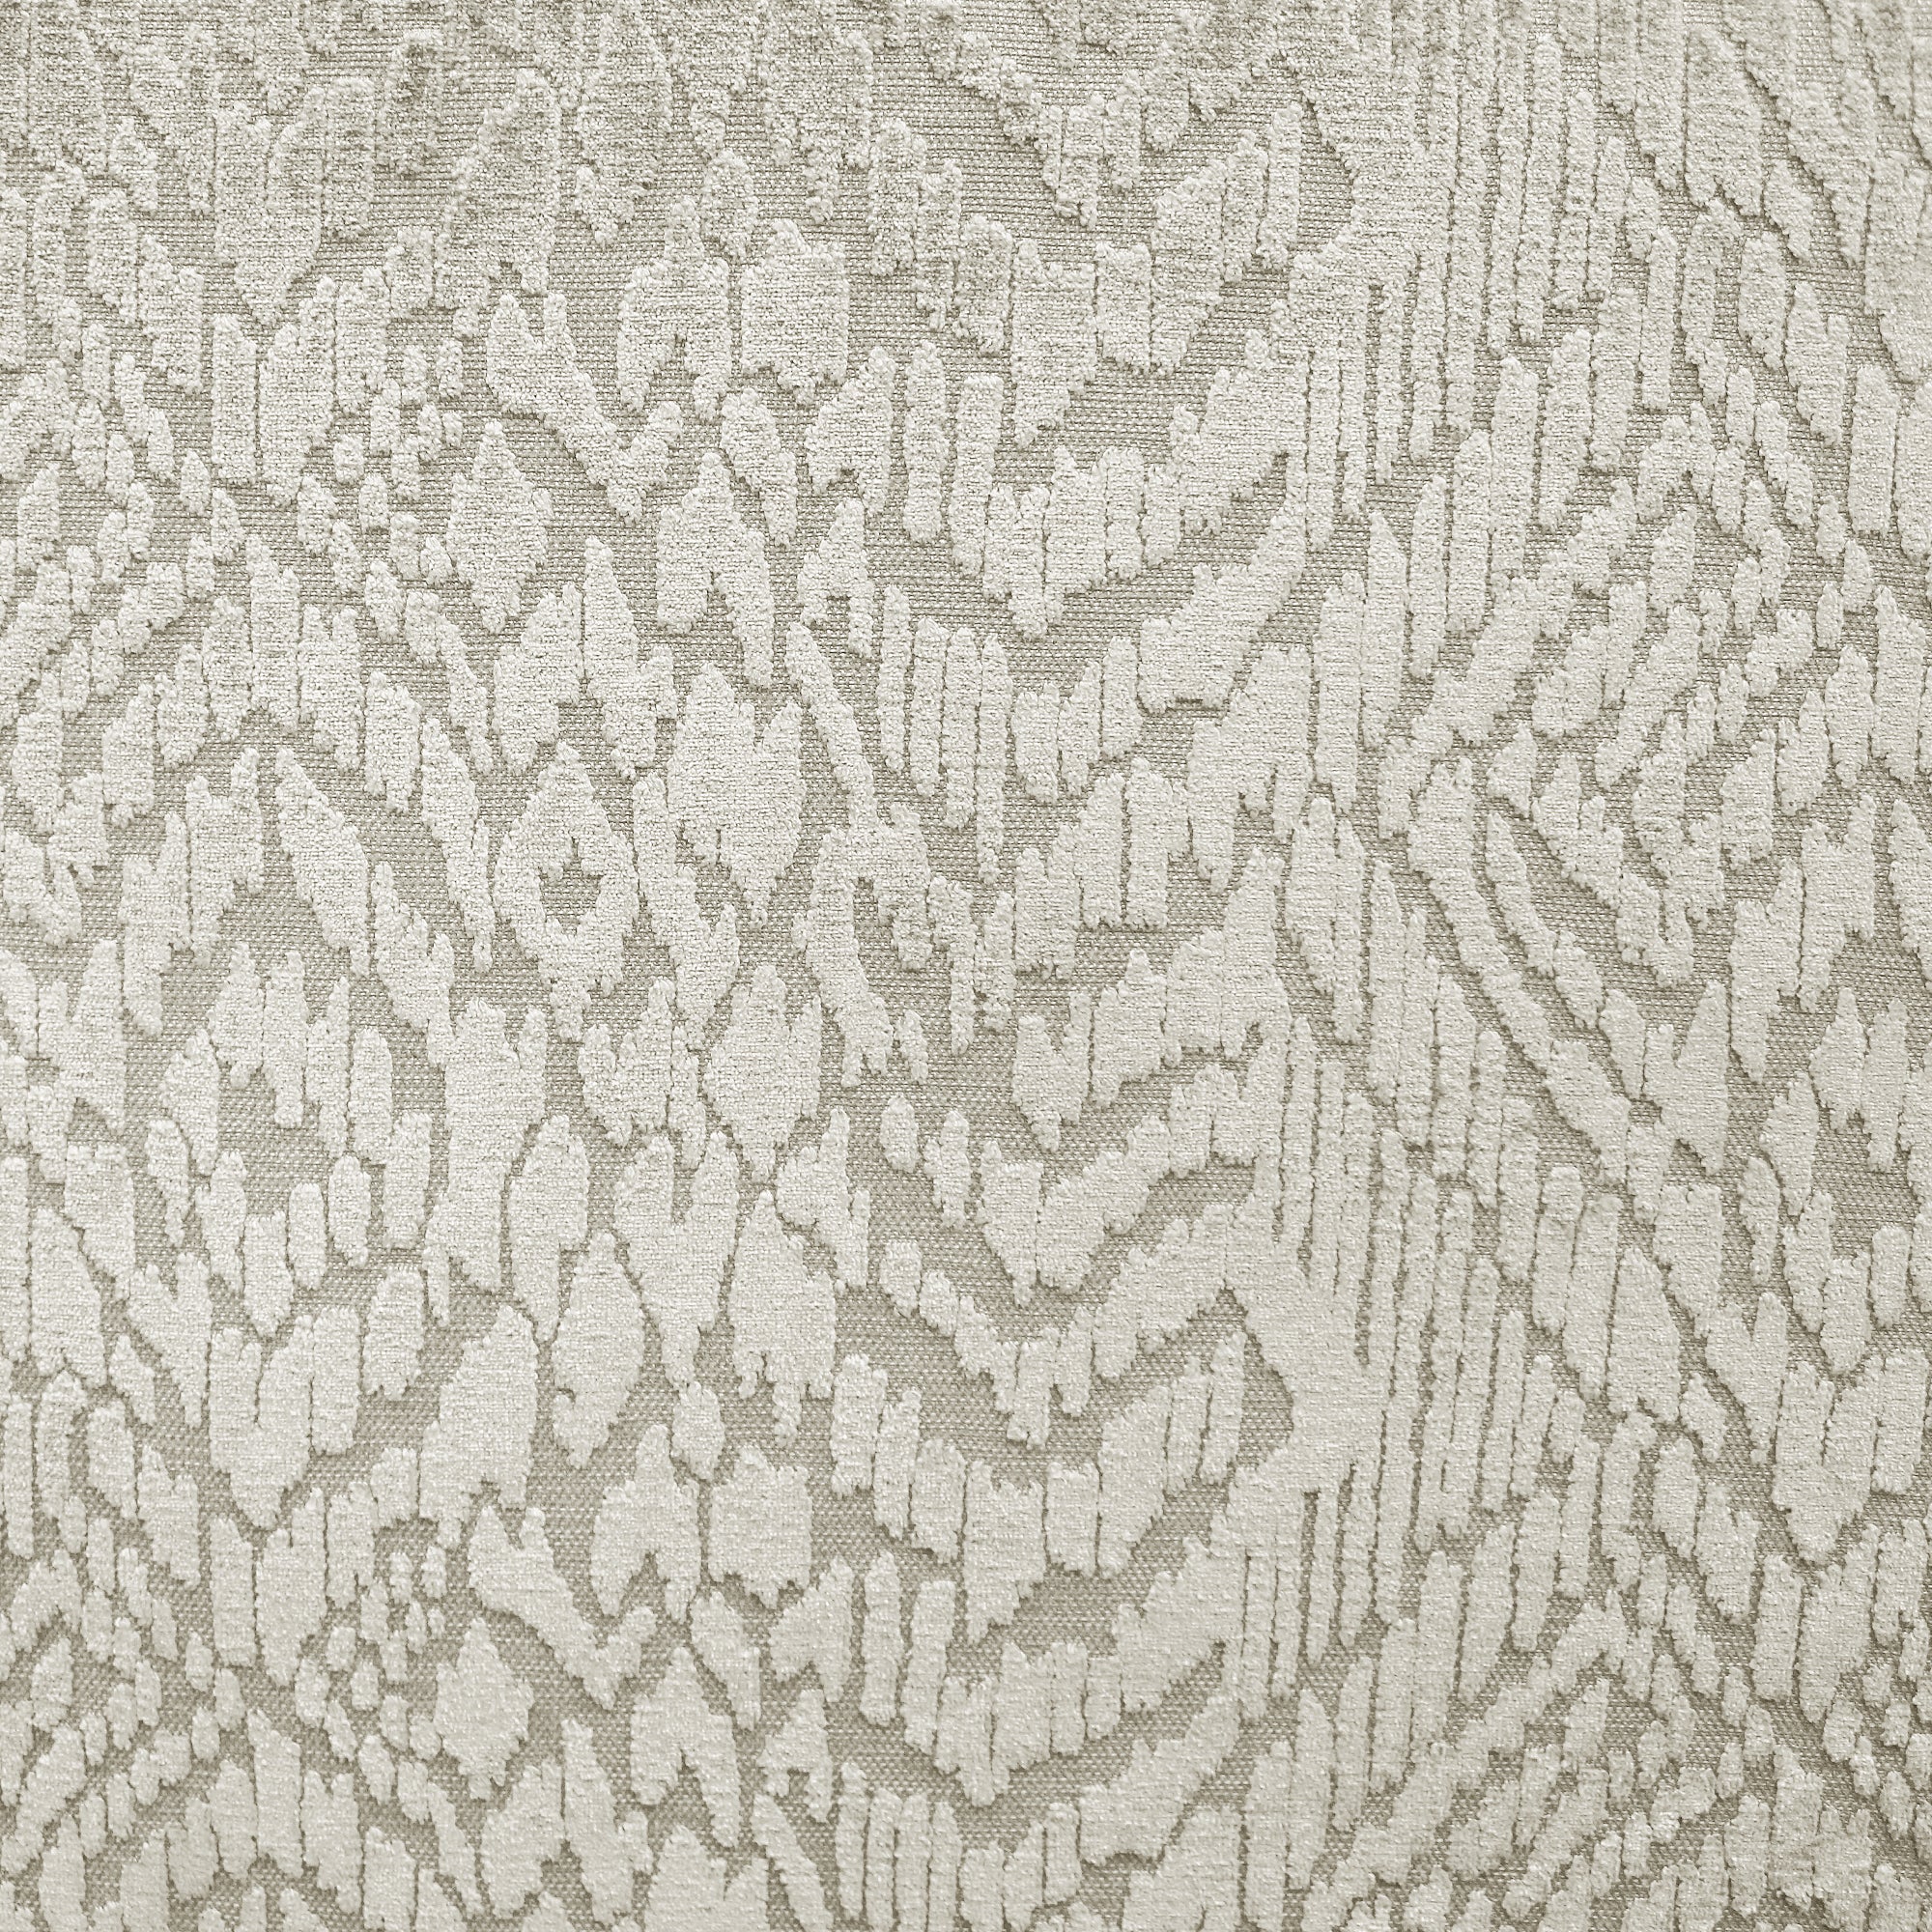 Blane Fabric | All Over Chenille on Linen Look